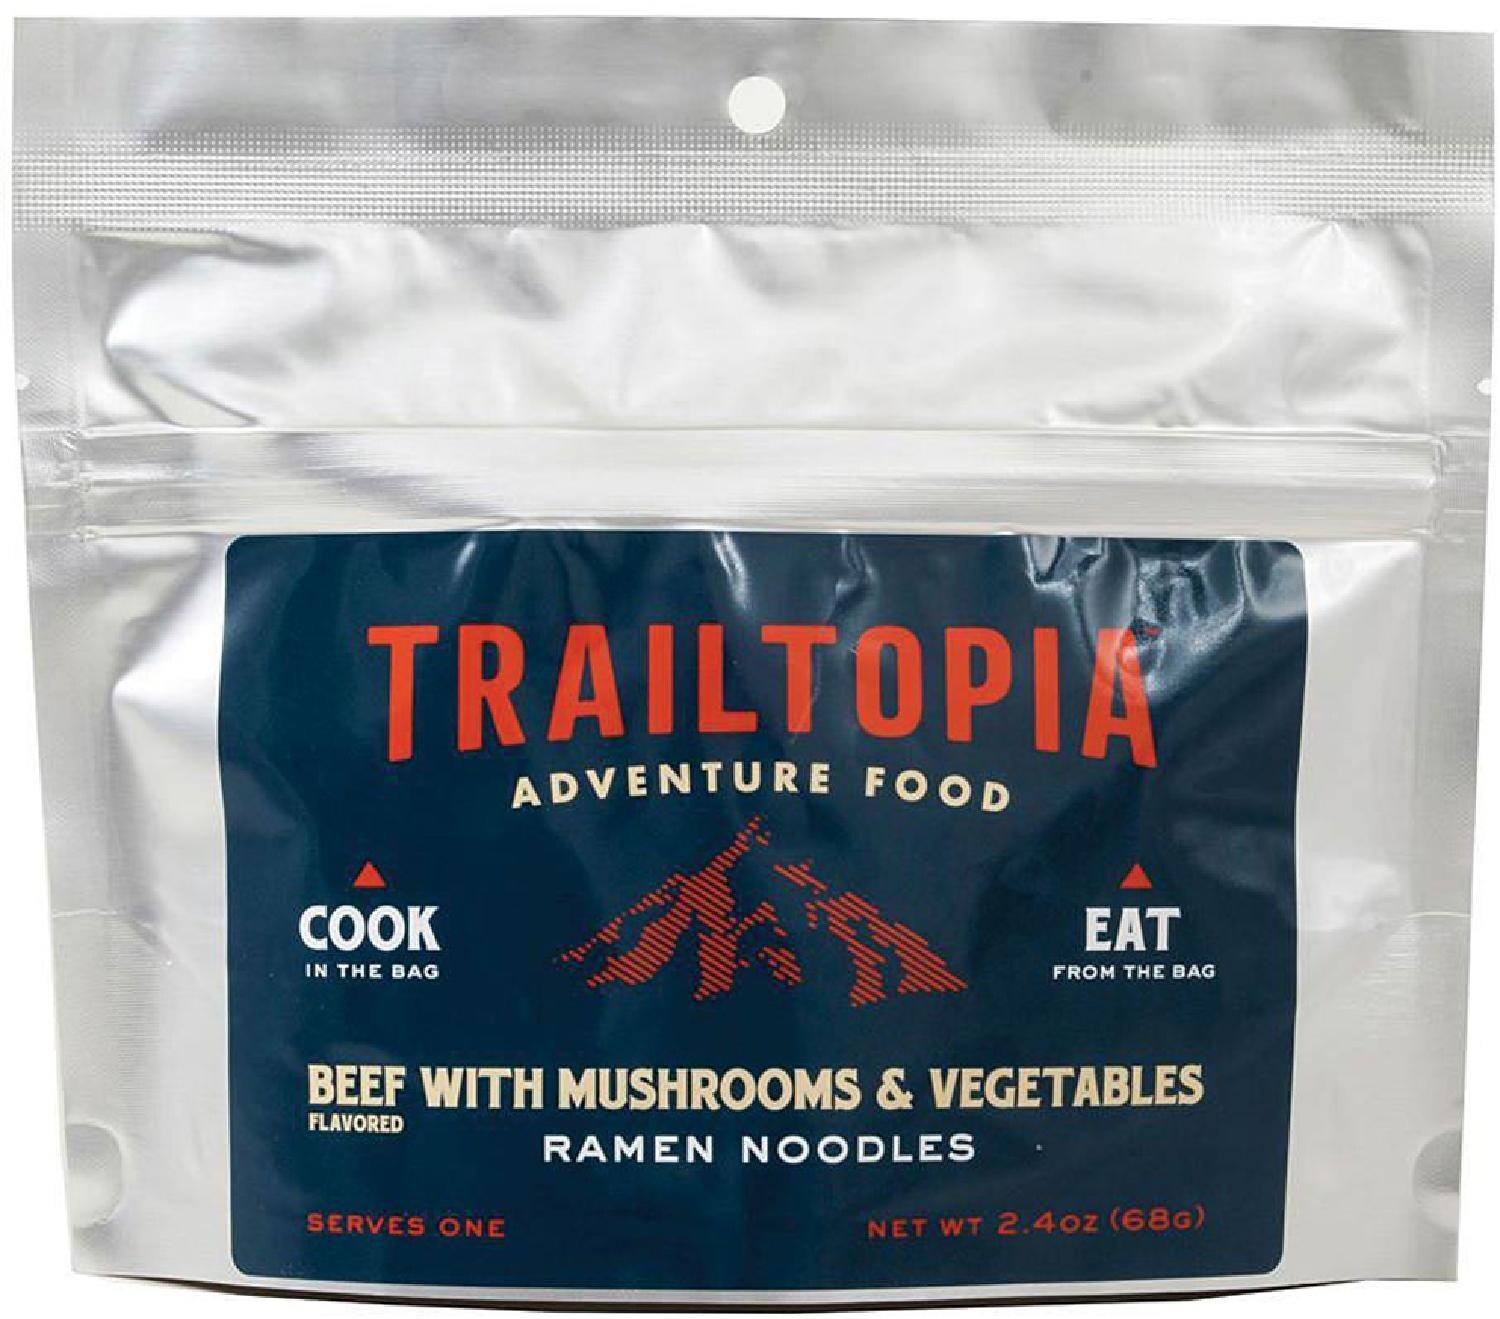 Trailtopia-Adventure-Food-backpacking-meal